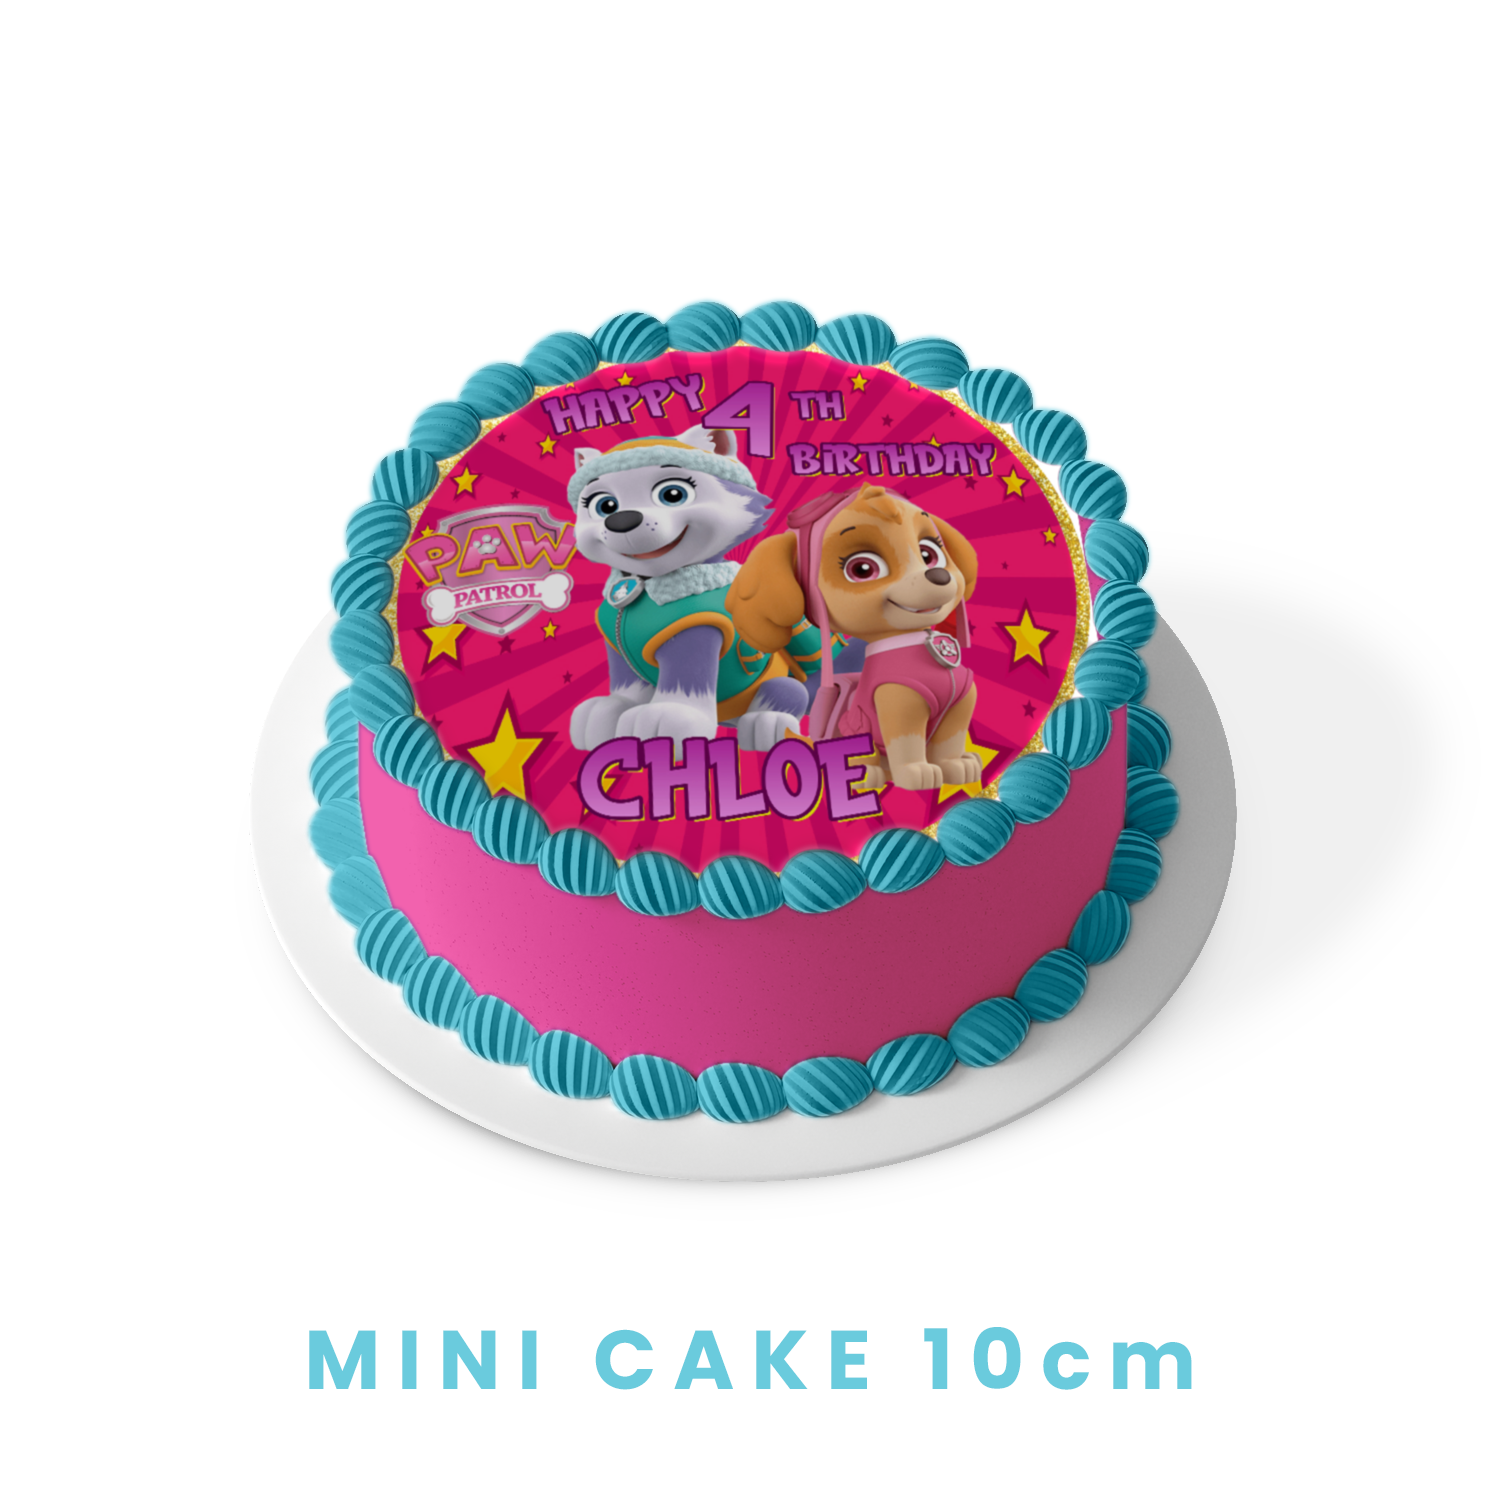 Paw Patrol Inspired Birthday Cake with Ryder Chase And Skye | Susie's Cakes